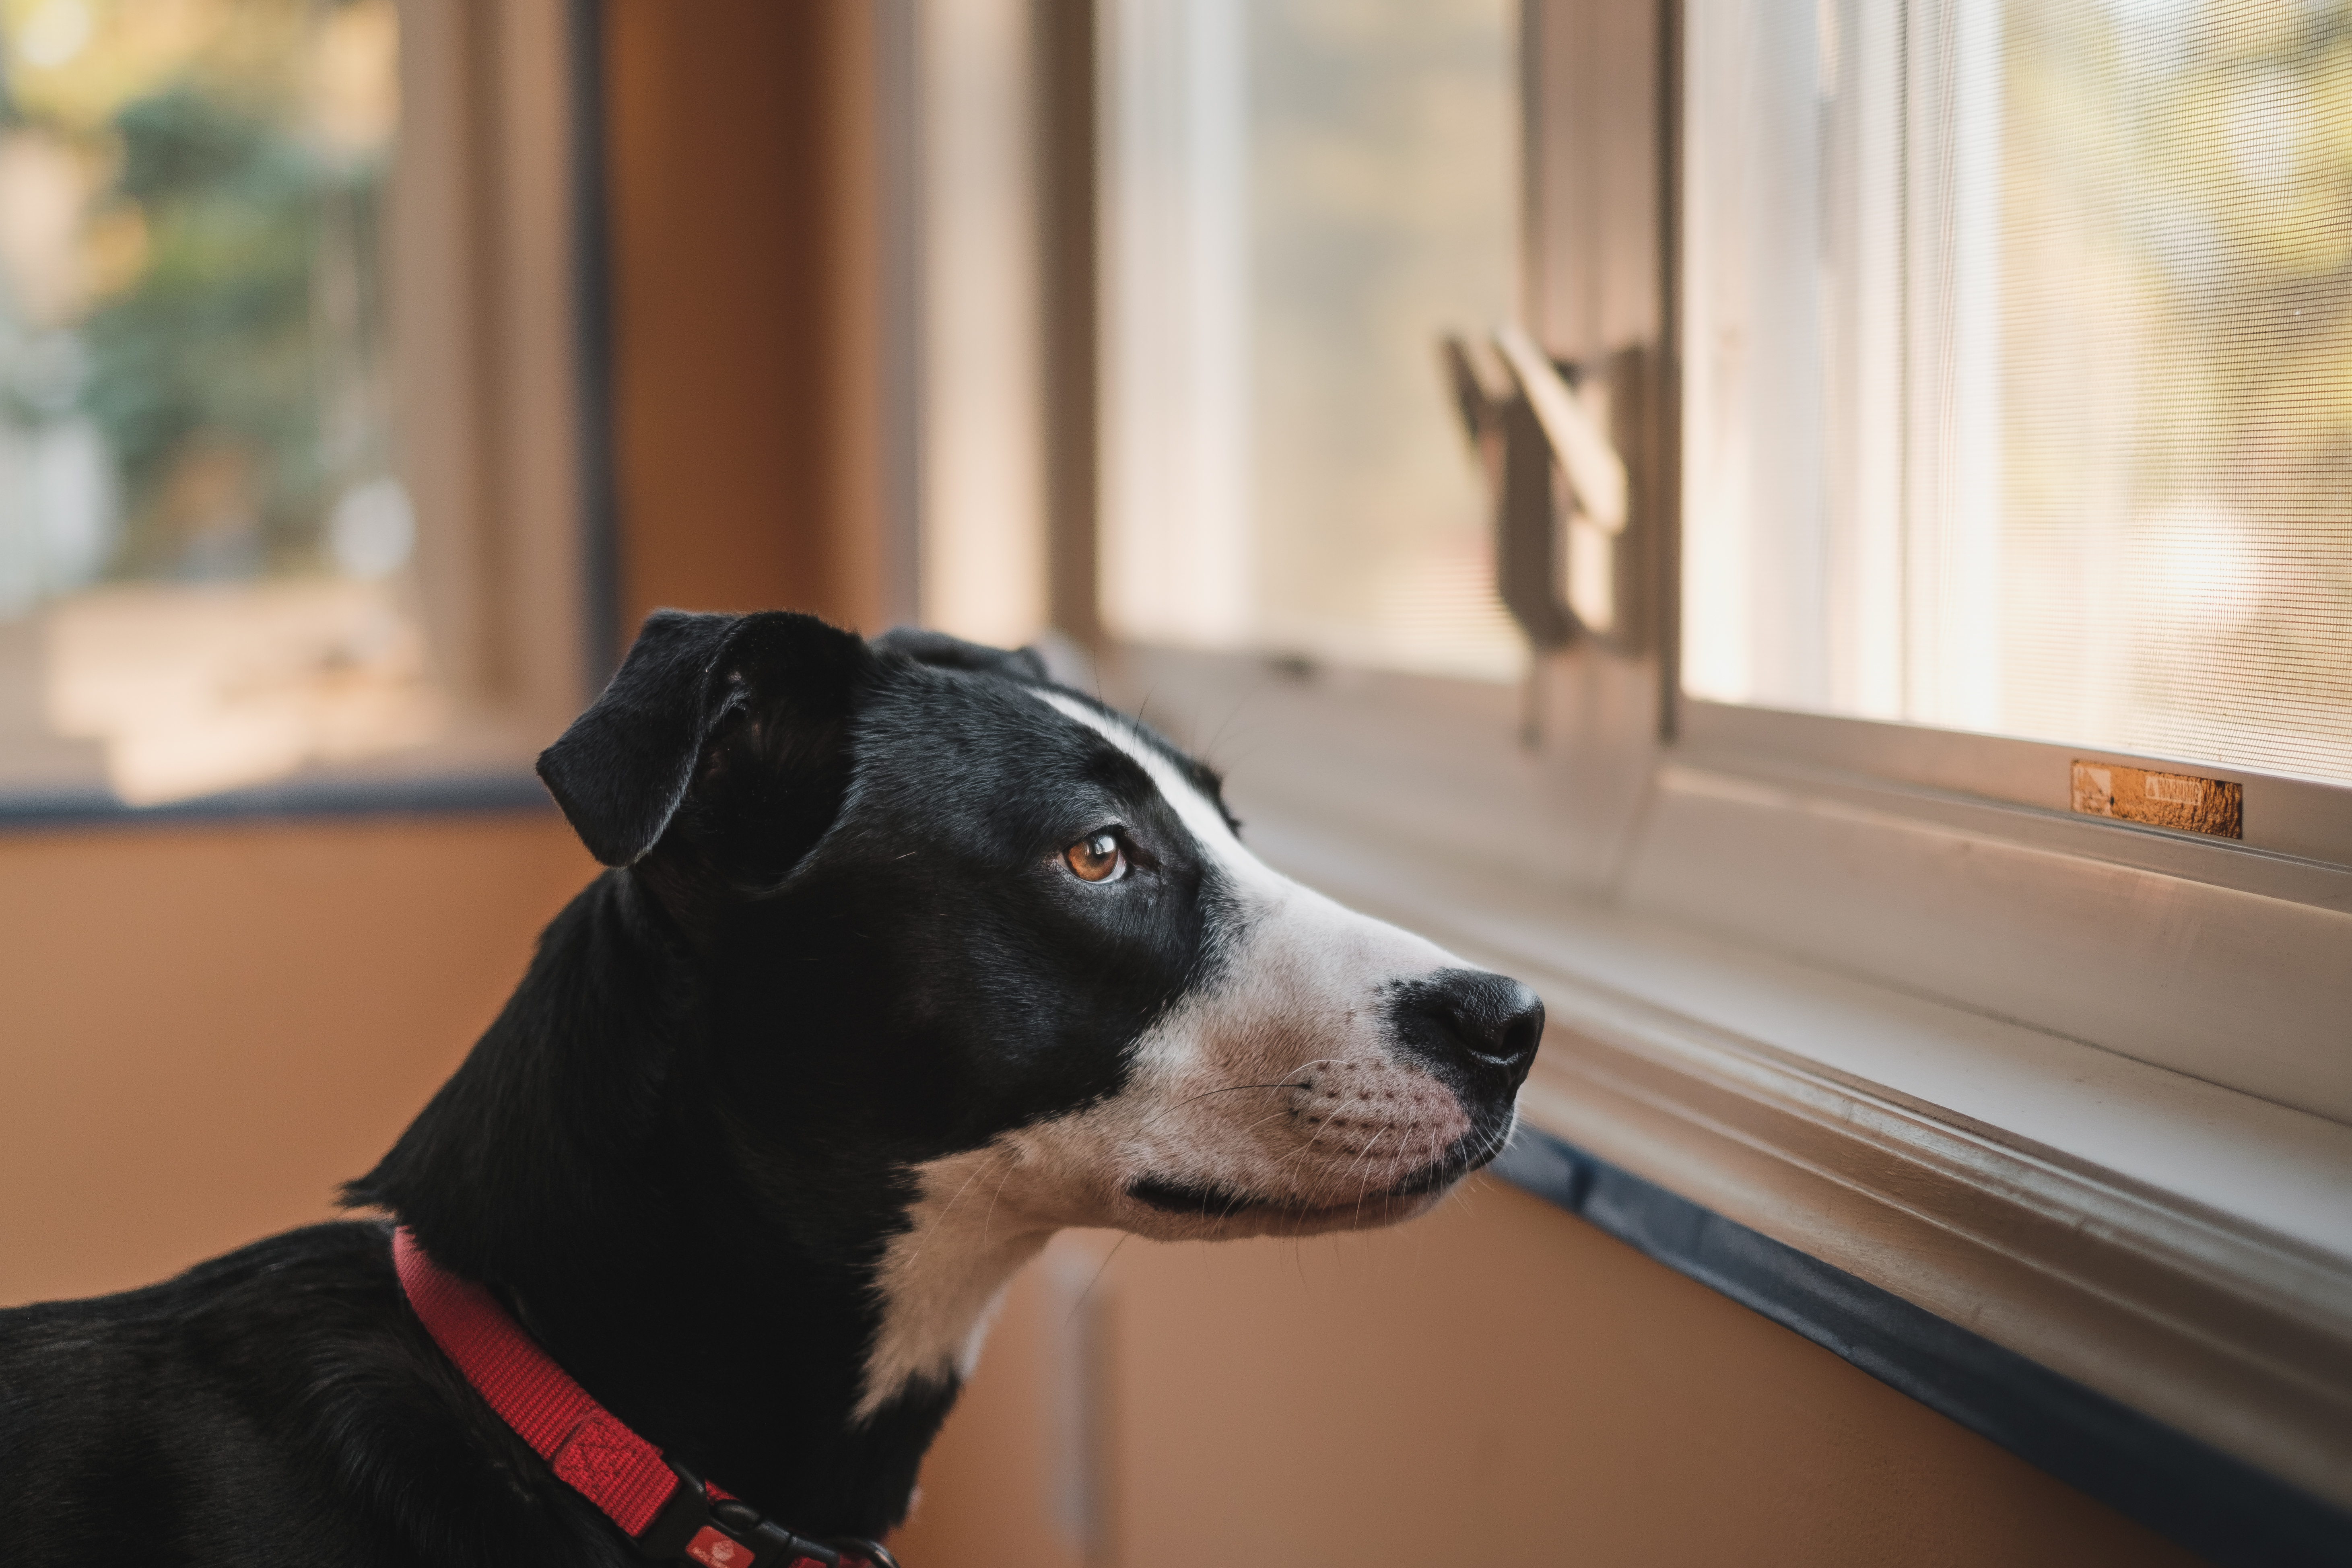 A black and white dog looks out the window to the street